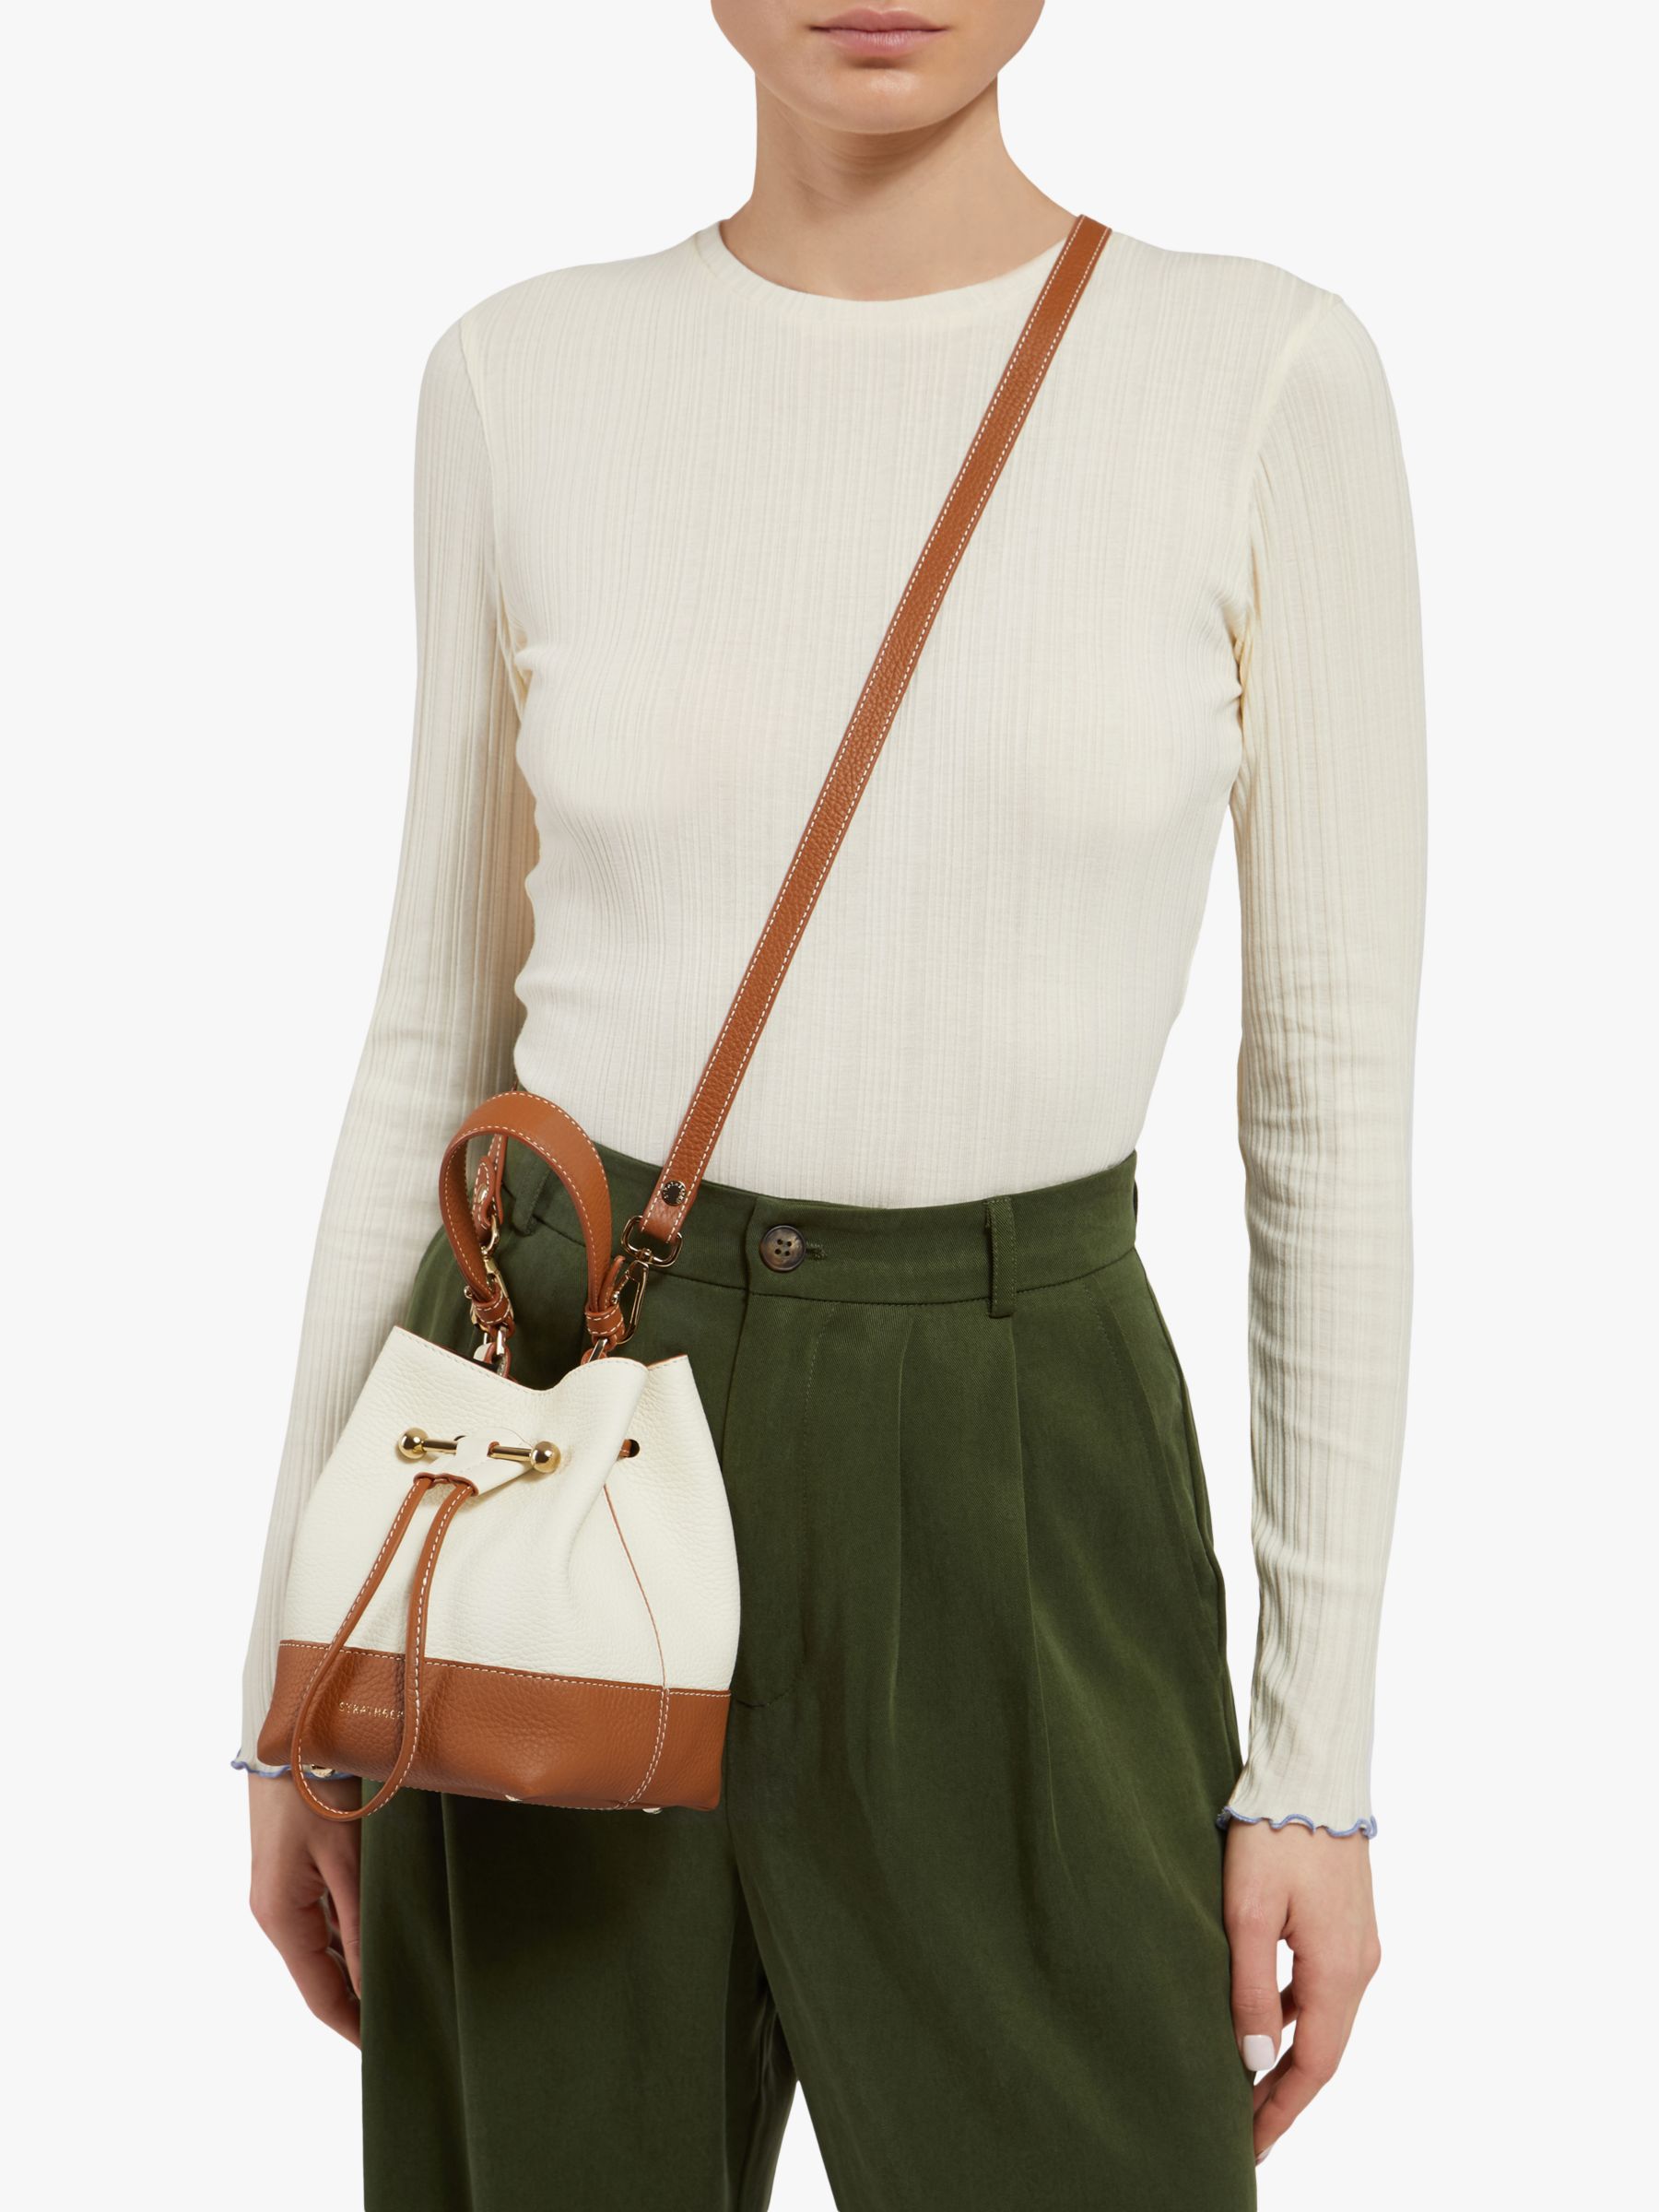 Strathberry Lana Osette Leather Bucket Bag in White